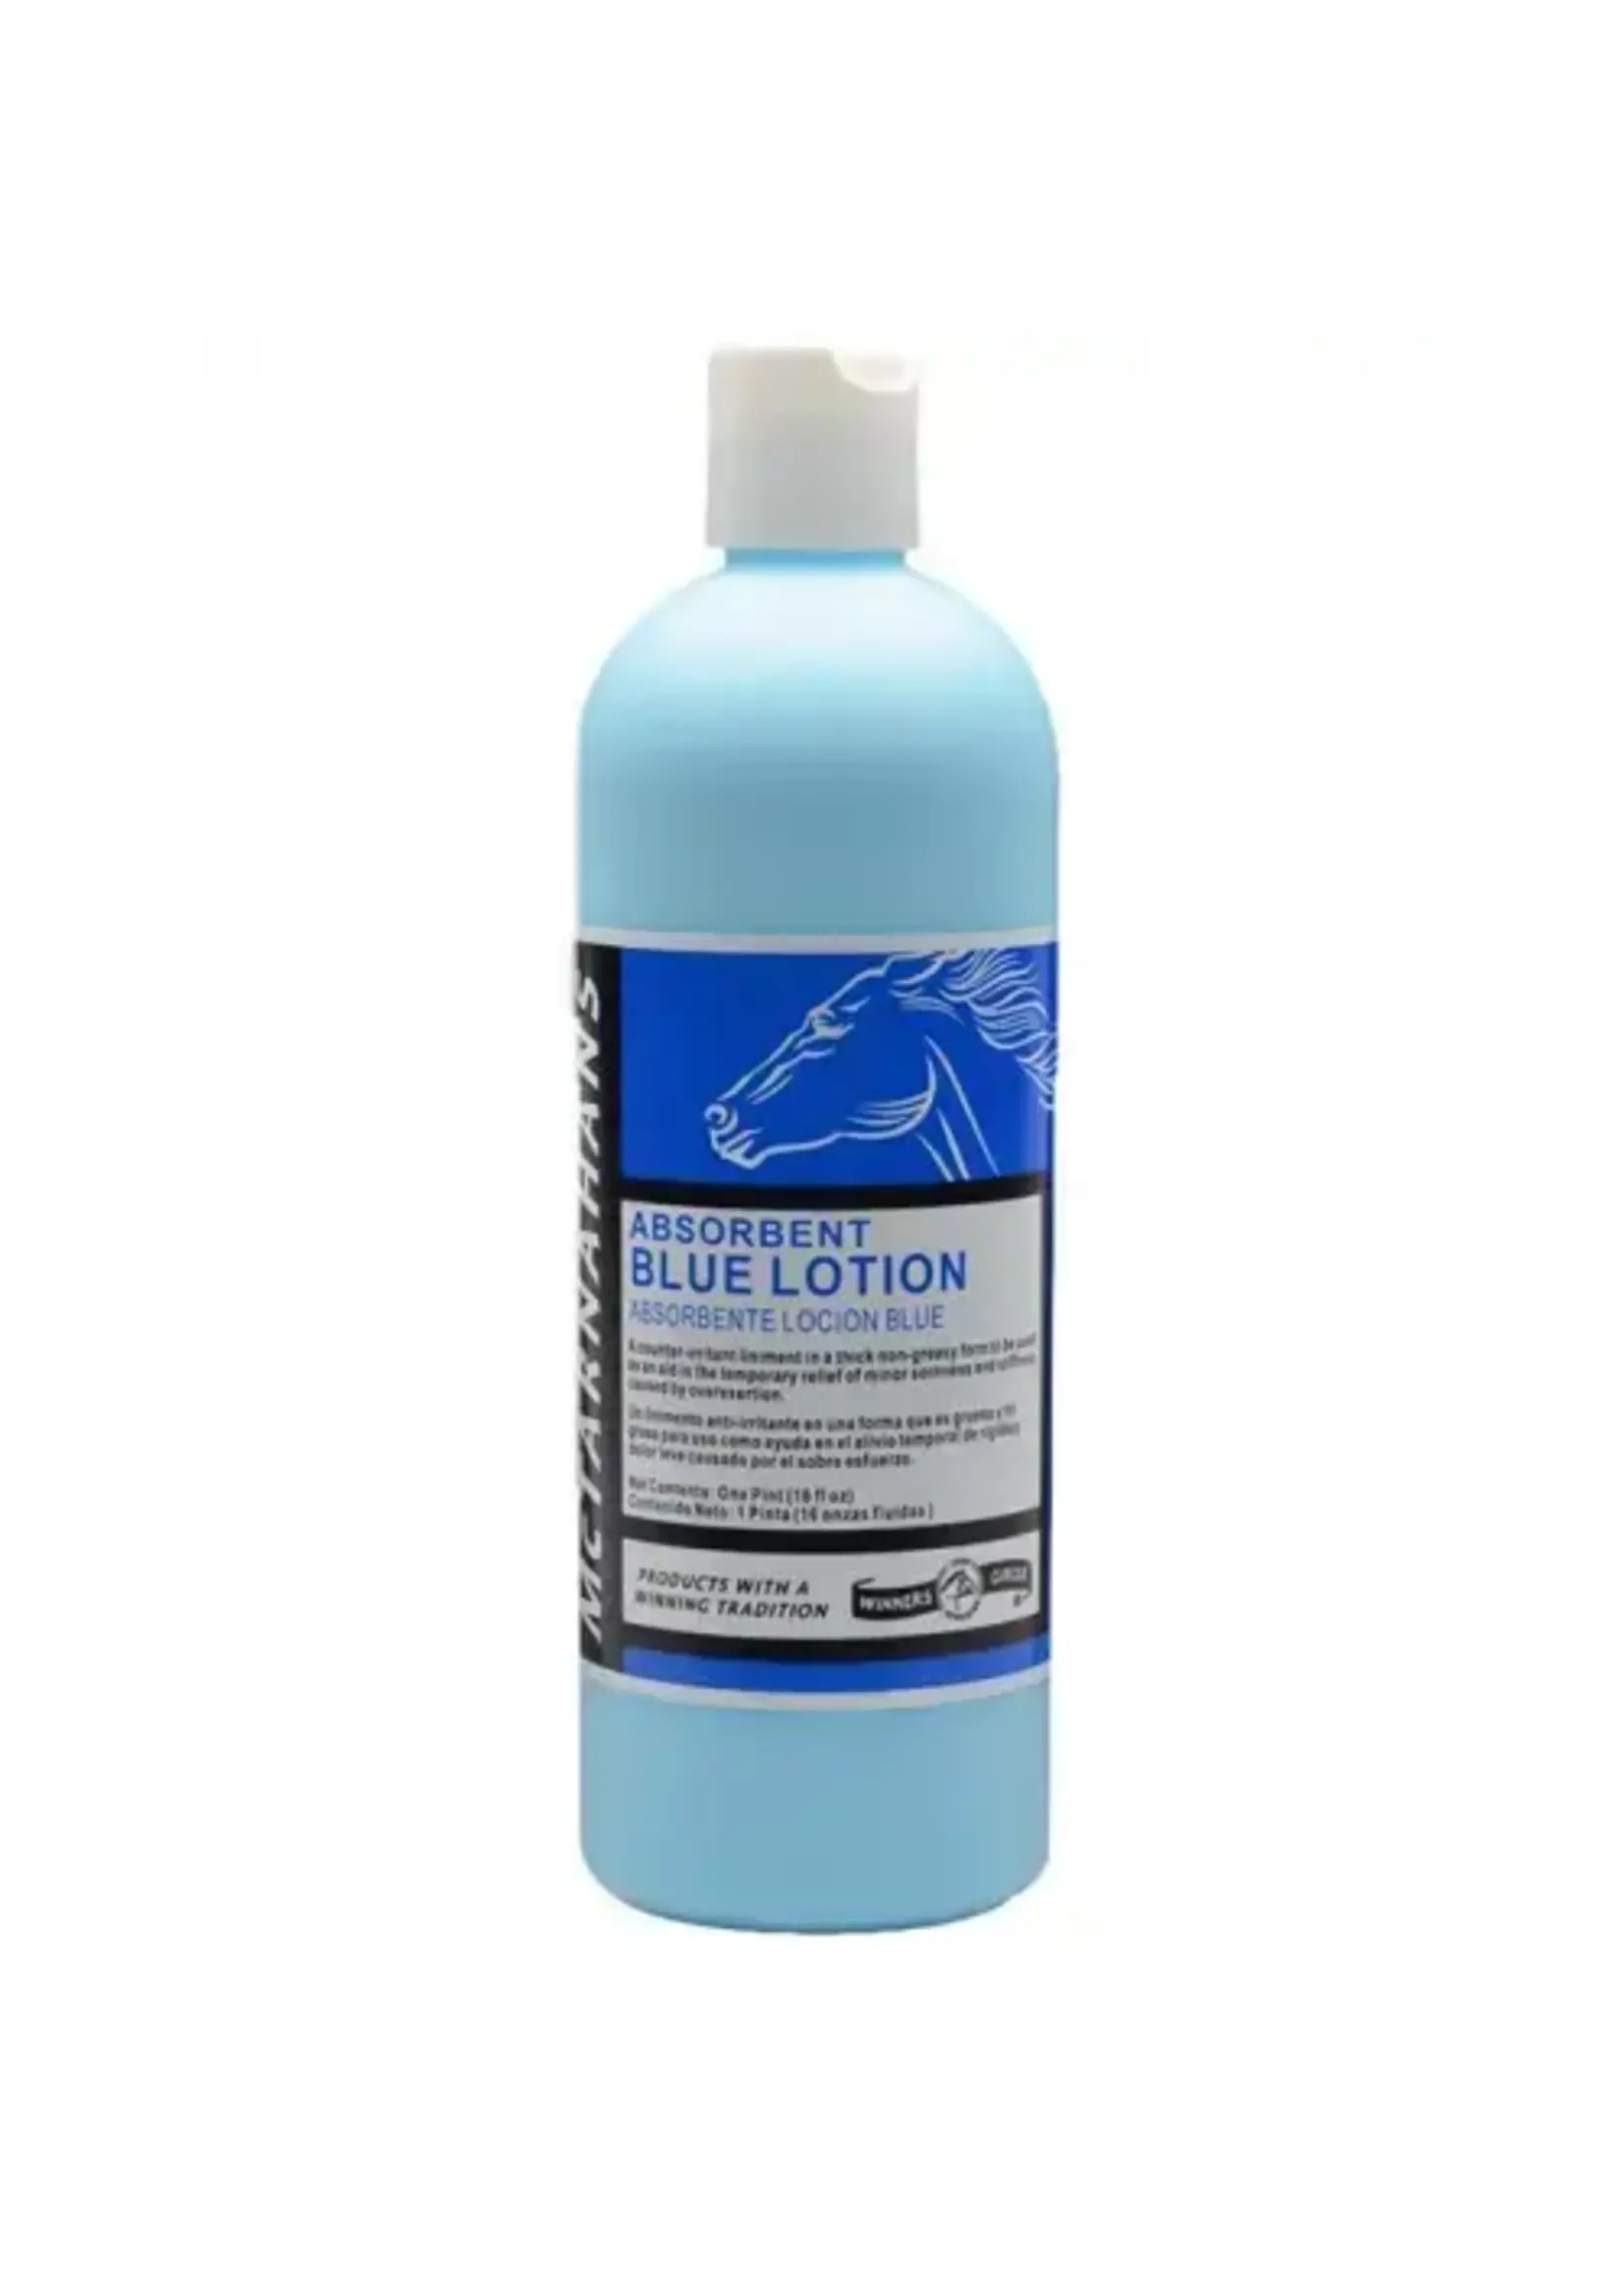 MCTarnahans McTarnahans Blue Lotion